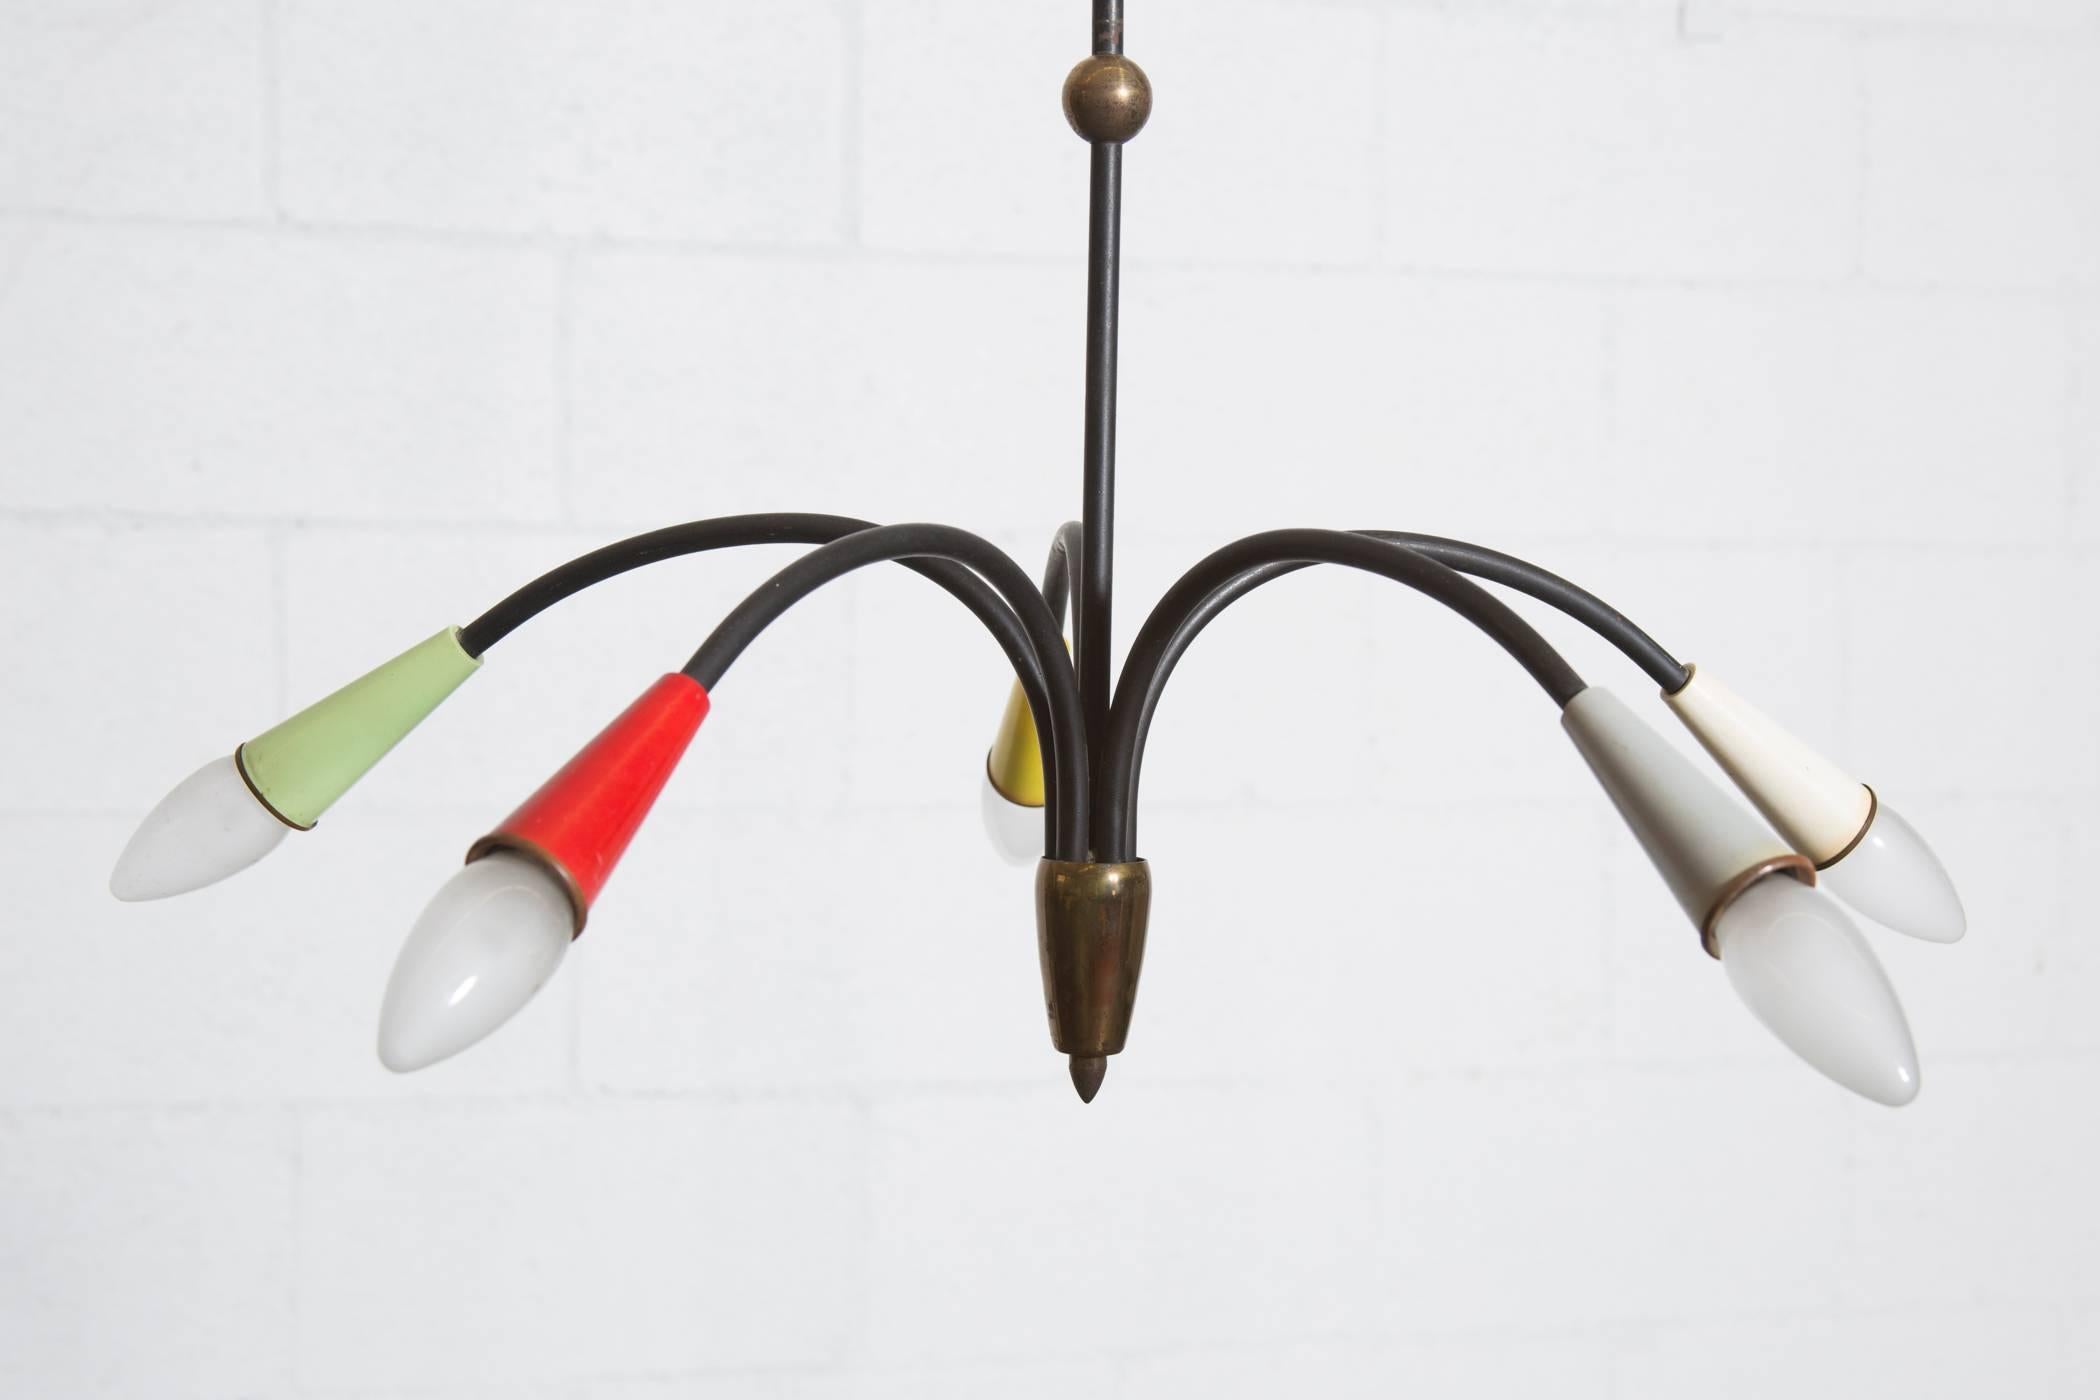 Sweet and delicate, Mid-Century, five armed black enameled metal chandelier with brass accents and multi-colored socket casings. Original condition with some wear consistent with its age. Shown with original European candelabra bulbs. Will provide